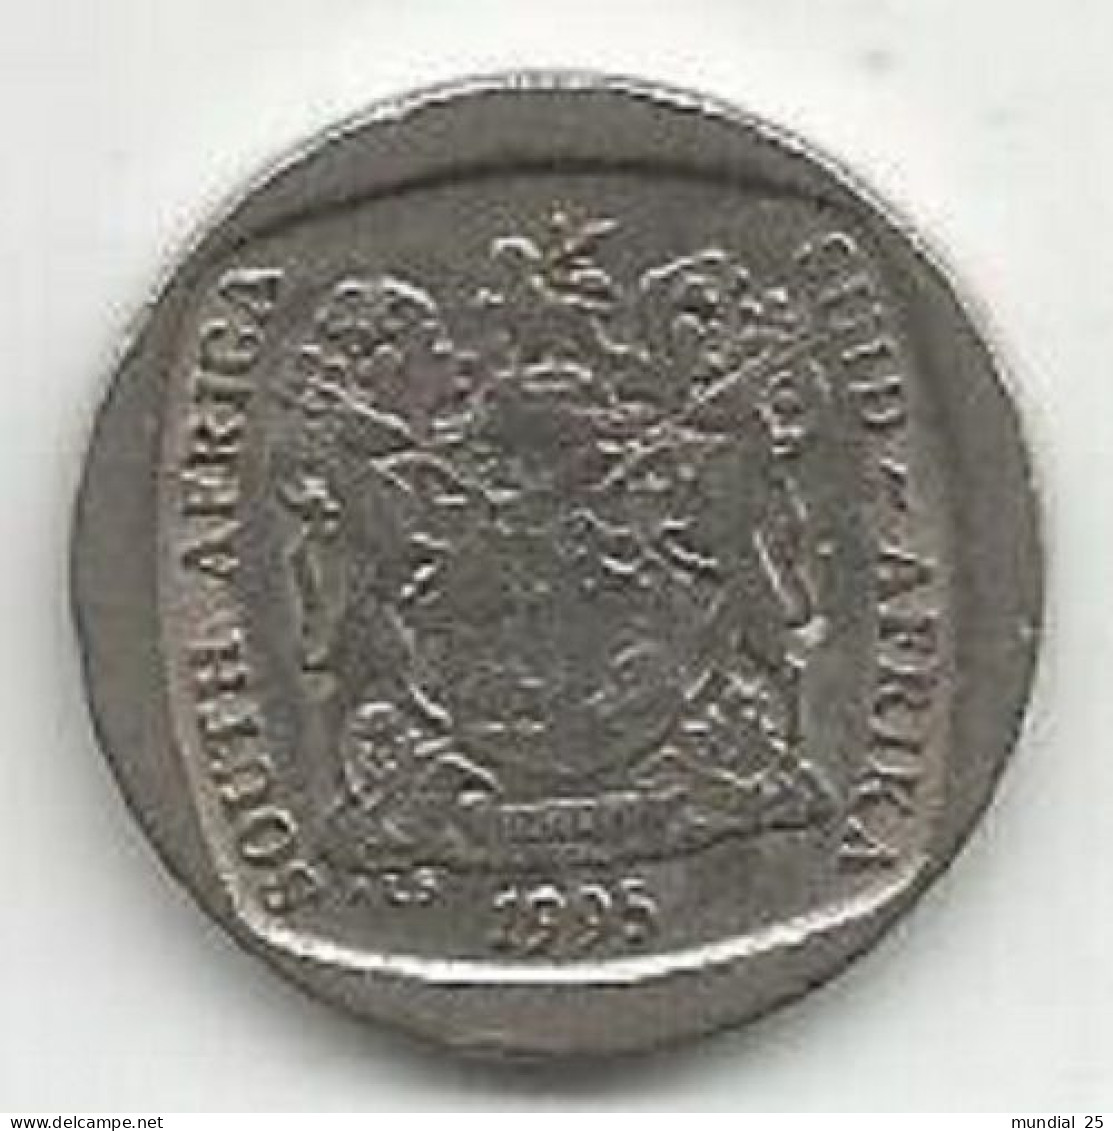 SOUTH AFRICA 1 RAND 1995 - South Africa